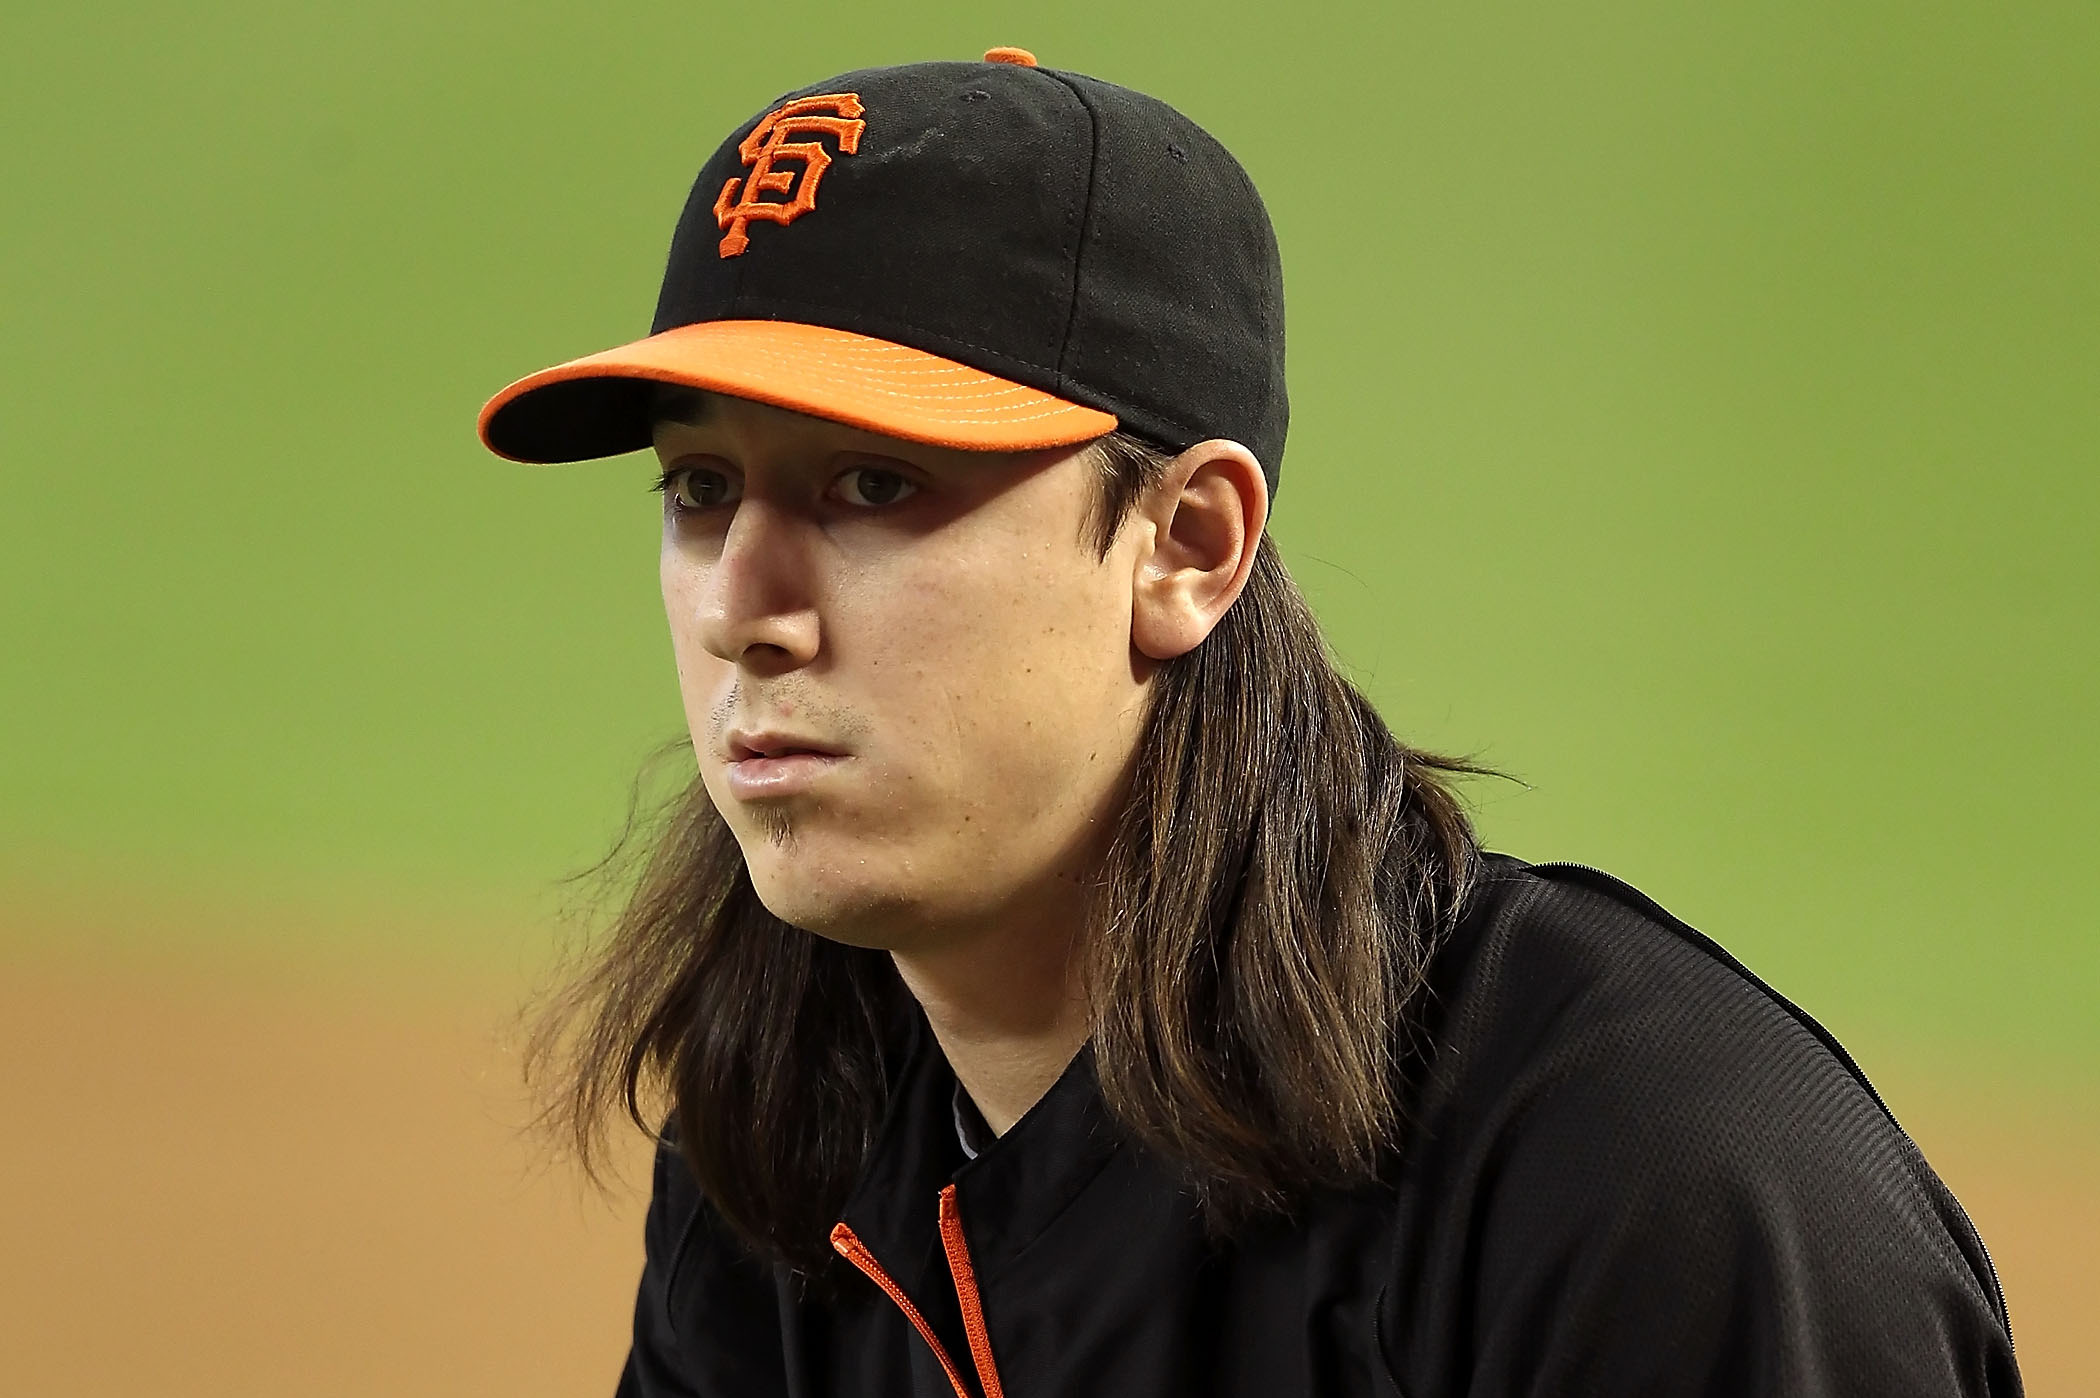 MLB Notes: Tim Lincecum signs $2.5 million, 1-year deal with